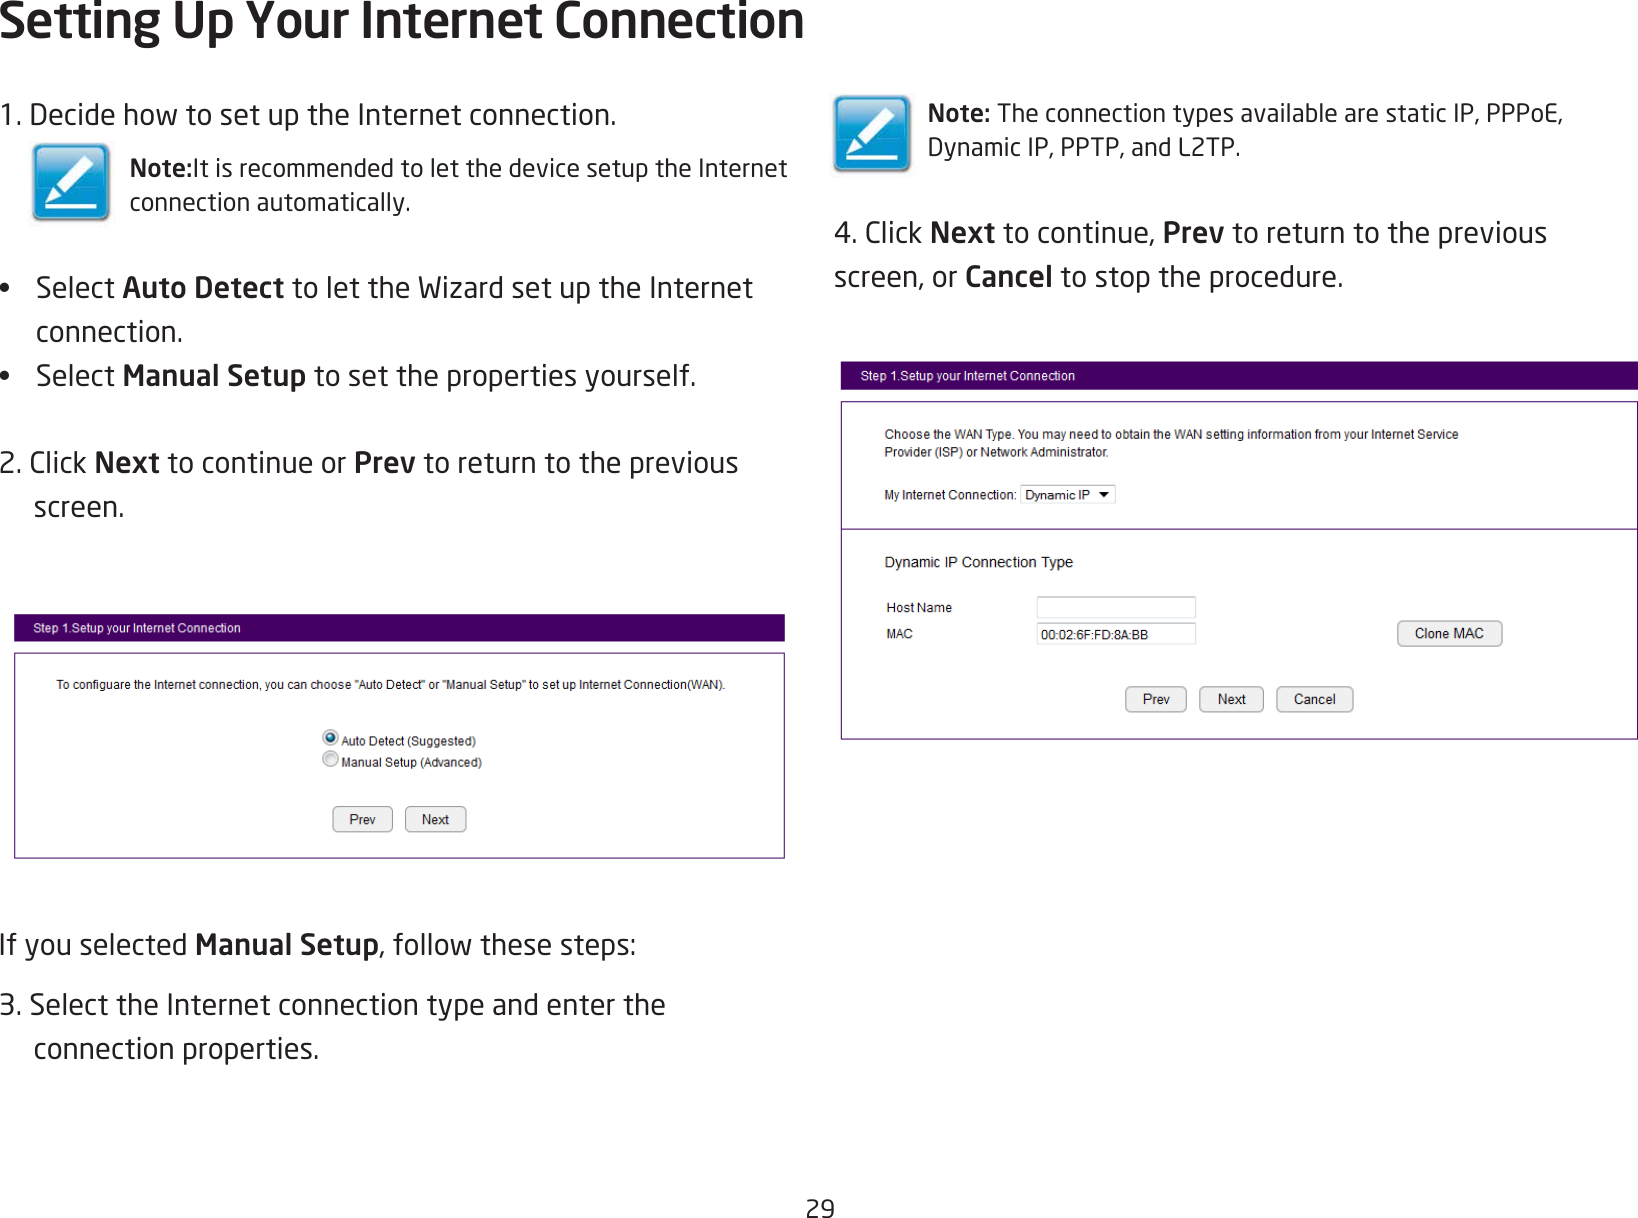 291.DecidehowtosetuptheInternetconnection.Note:It is recommended to let the device setup the Internetconnection automatically.•  Select Auto DetecttolettheWizardsetuptheInternetconnection.•  Select Manual Setup to set the properties yourself.2.ClickNext to continue or Prev to return to the previous screen.If you selected Manual Setup,followthesesteps:3. Select the Internet connection type and enter the  connection properties.Setting Up Your Internet ConnectionNote:TheconnectiontypesavailablearestaticIP,PPPoE,DynamicIP,PPTP,andL2TP.4.ClickNext to continue, Prev to return to the previousscreen, or Cancel to stop the procedure.